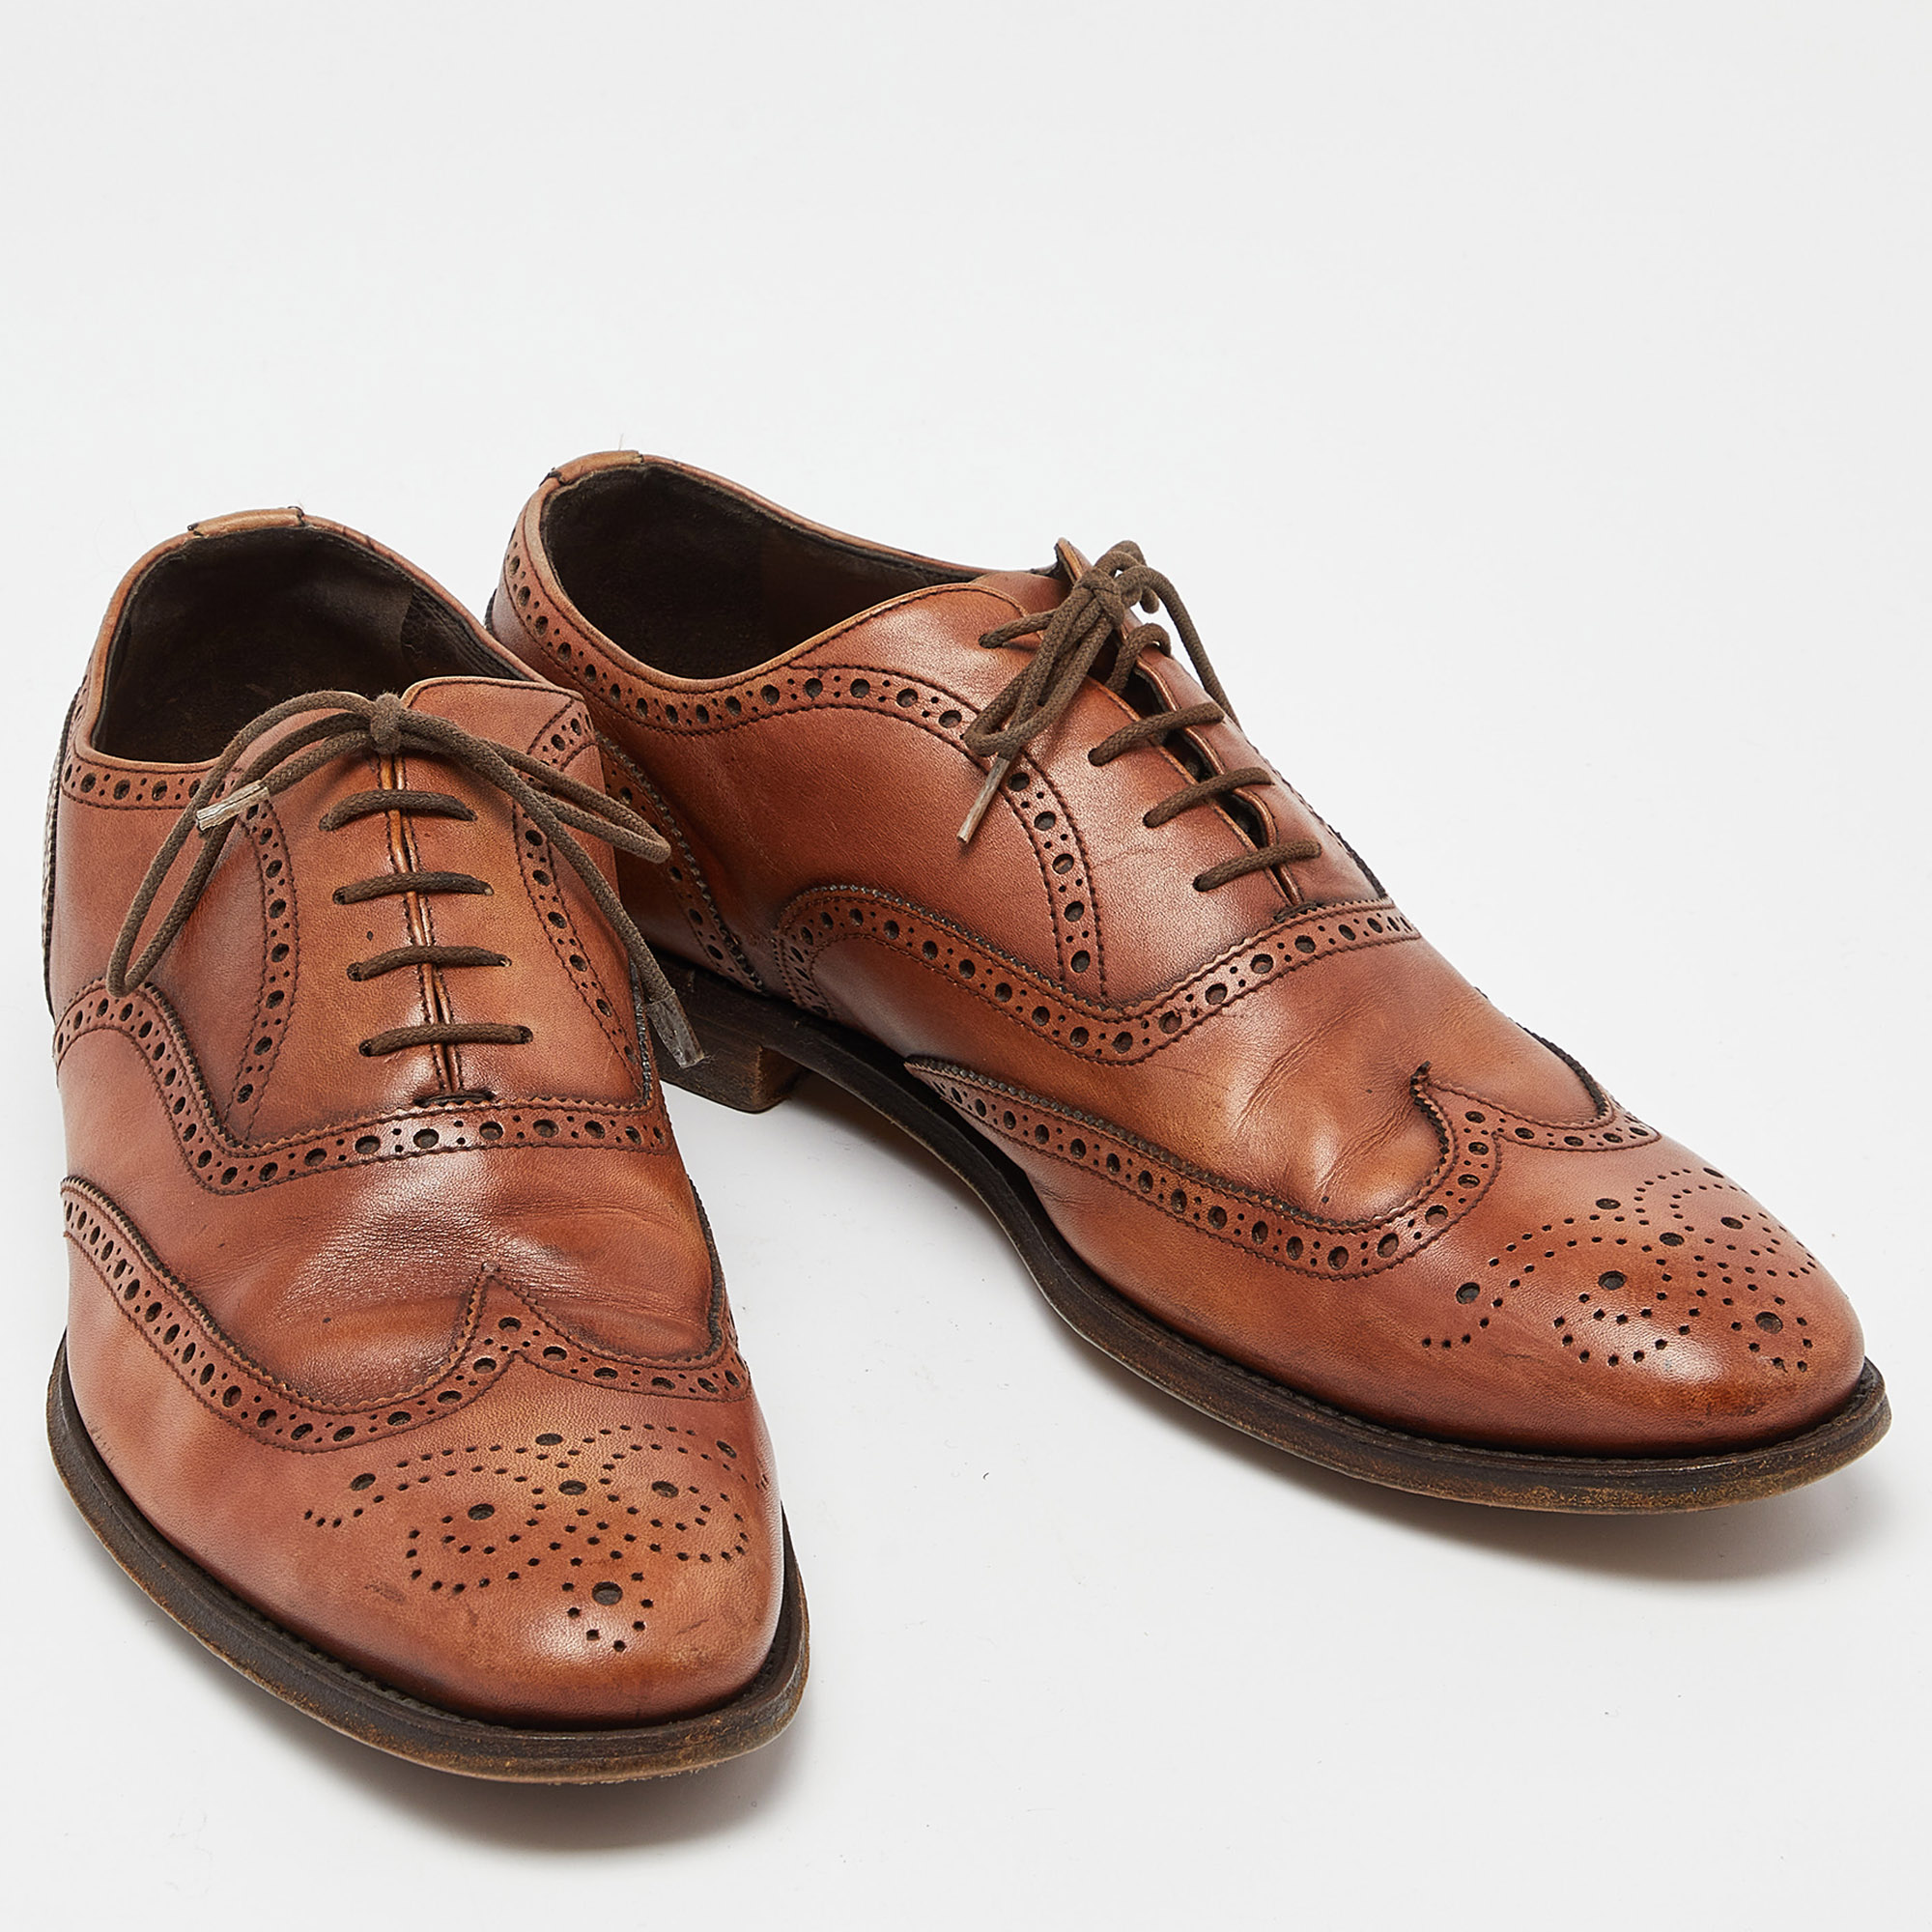 Prada Brown Leather Lace Up Oxfords Size 41